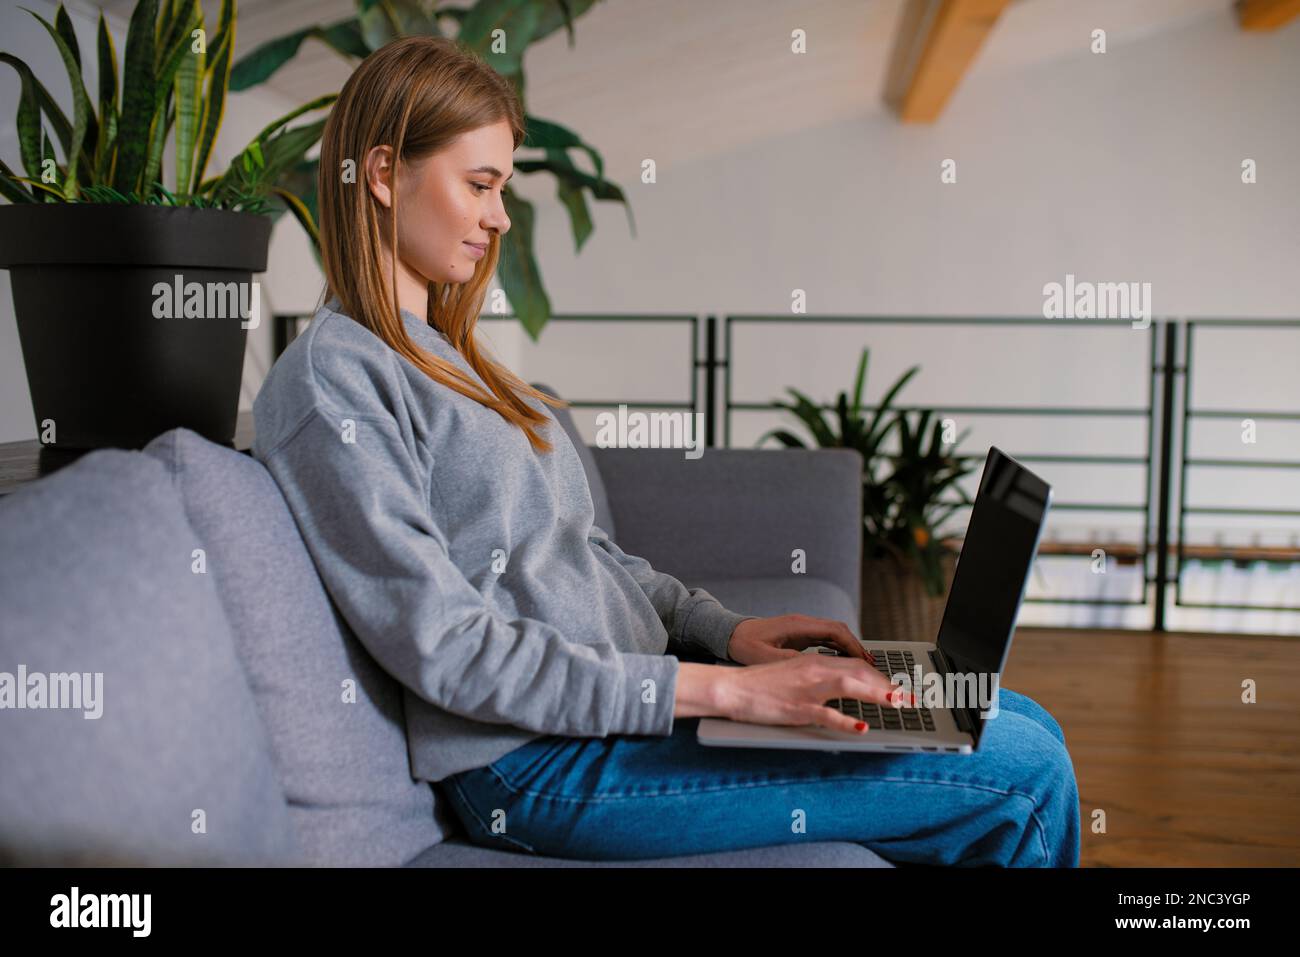 Side view in Happy blonde young woman looking a modern laptop screen sitting on cozy sofa at home, Hands at work with Digital Technology Stock Photo